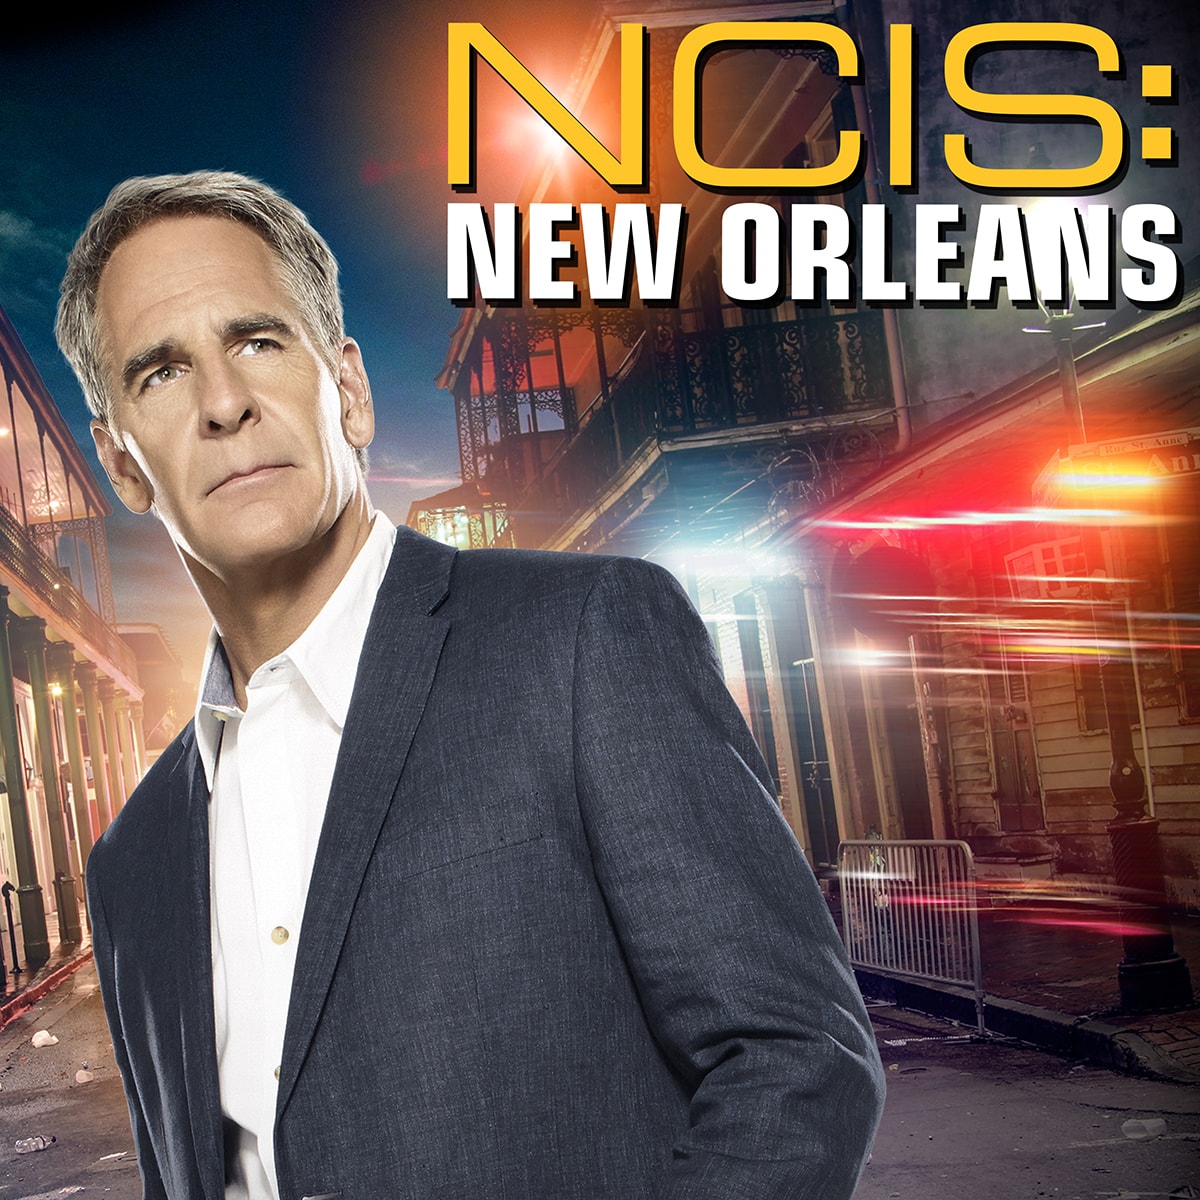 NCIS: New Orleans CBS Promos - Television Promos